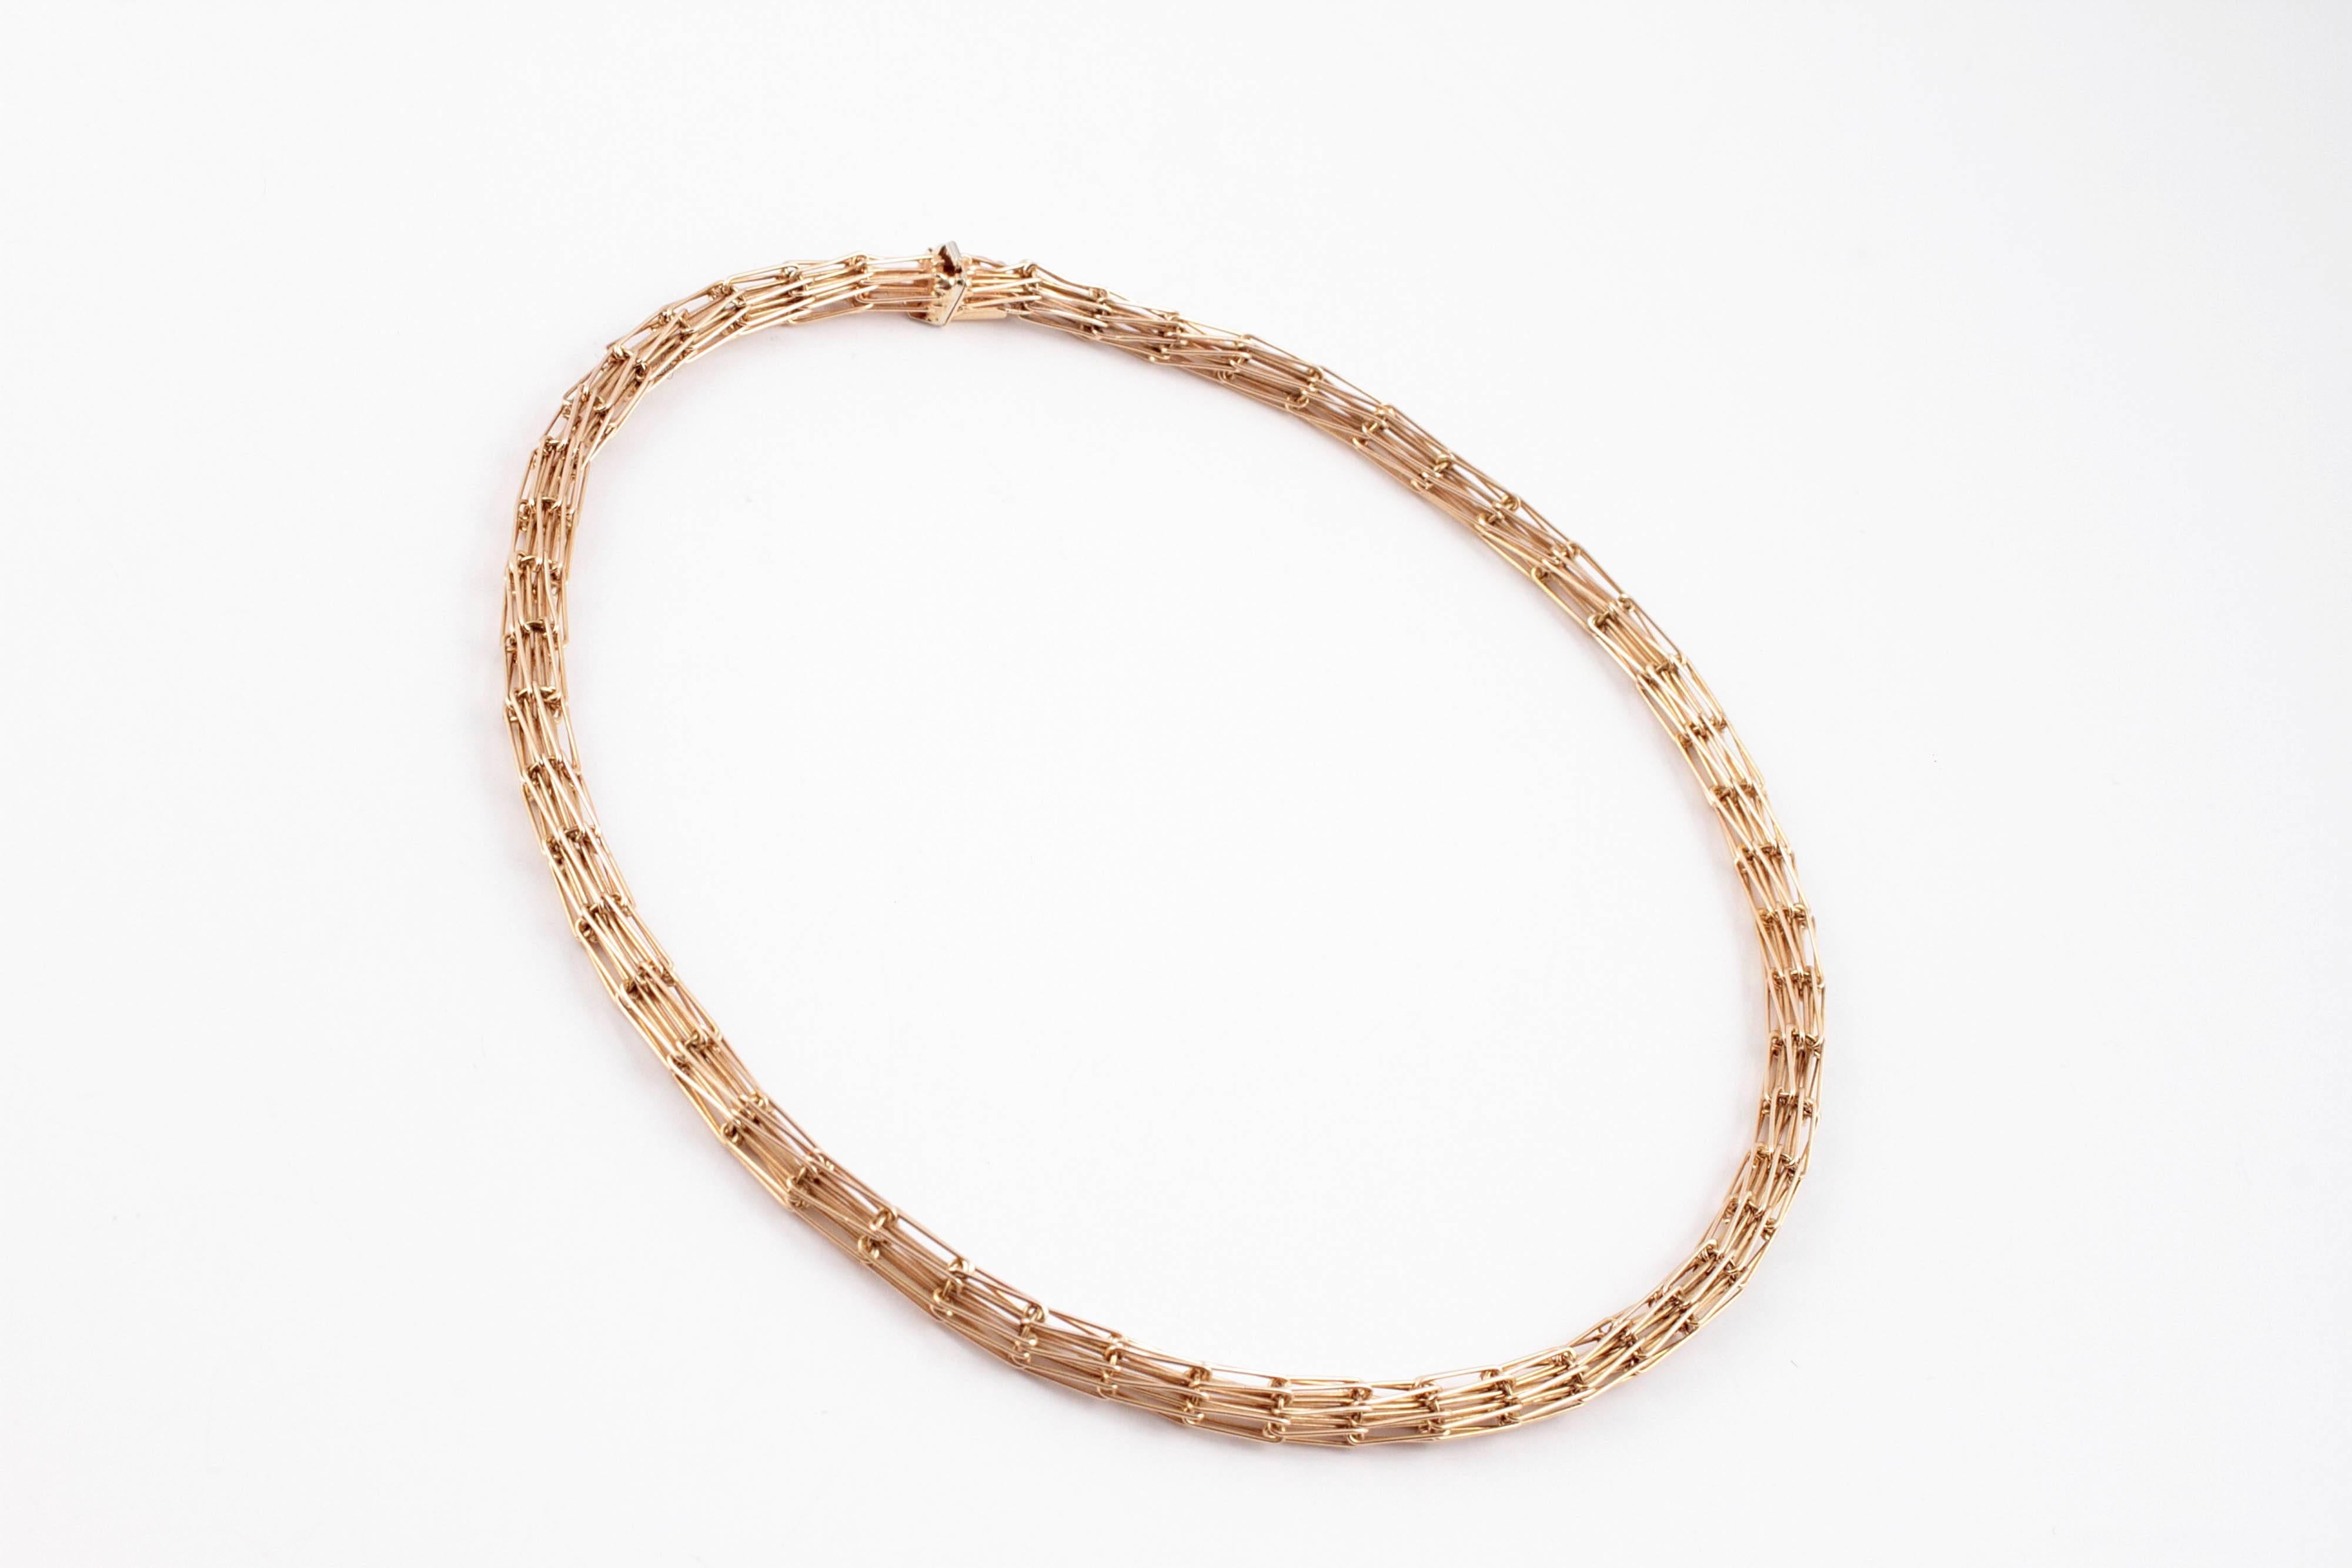 Stunning on the neck!  In 14 karat yellow gold, 16 inches in length.